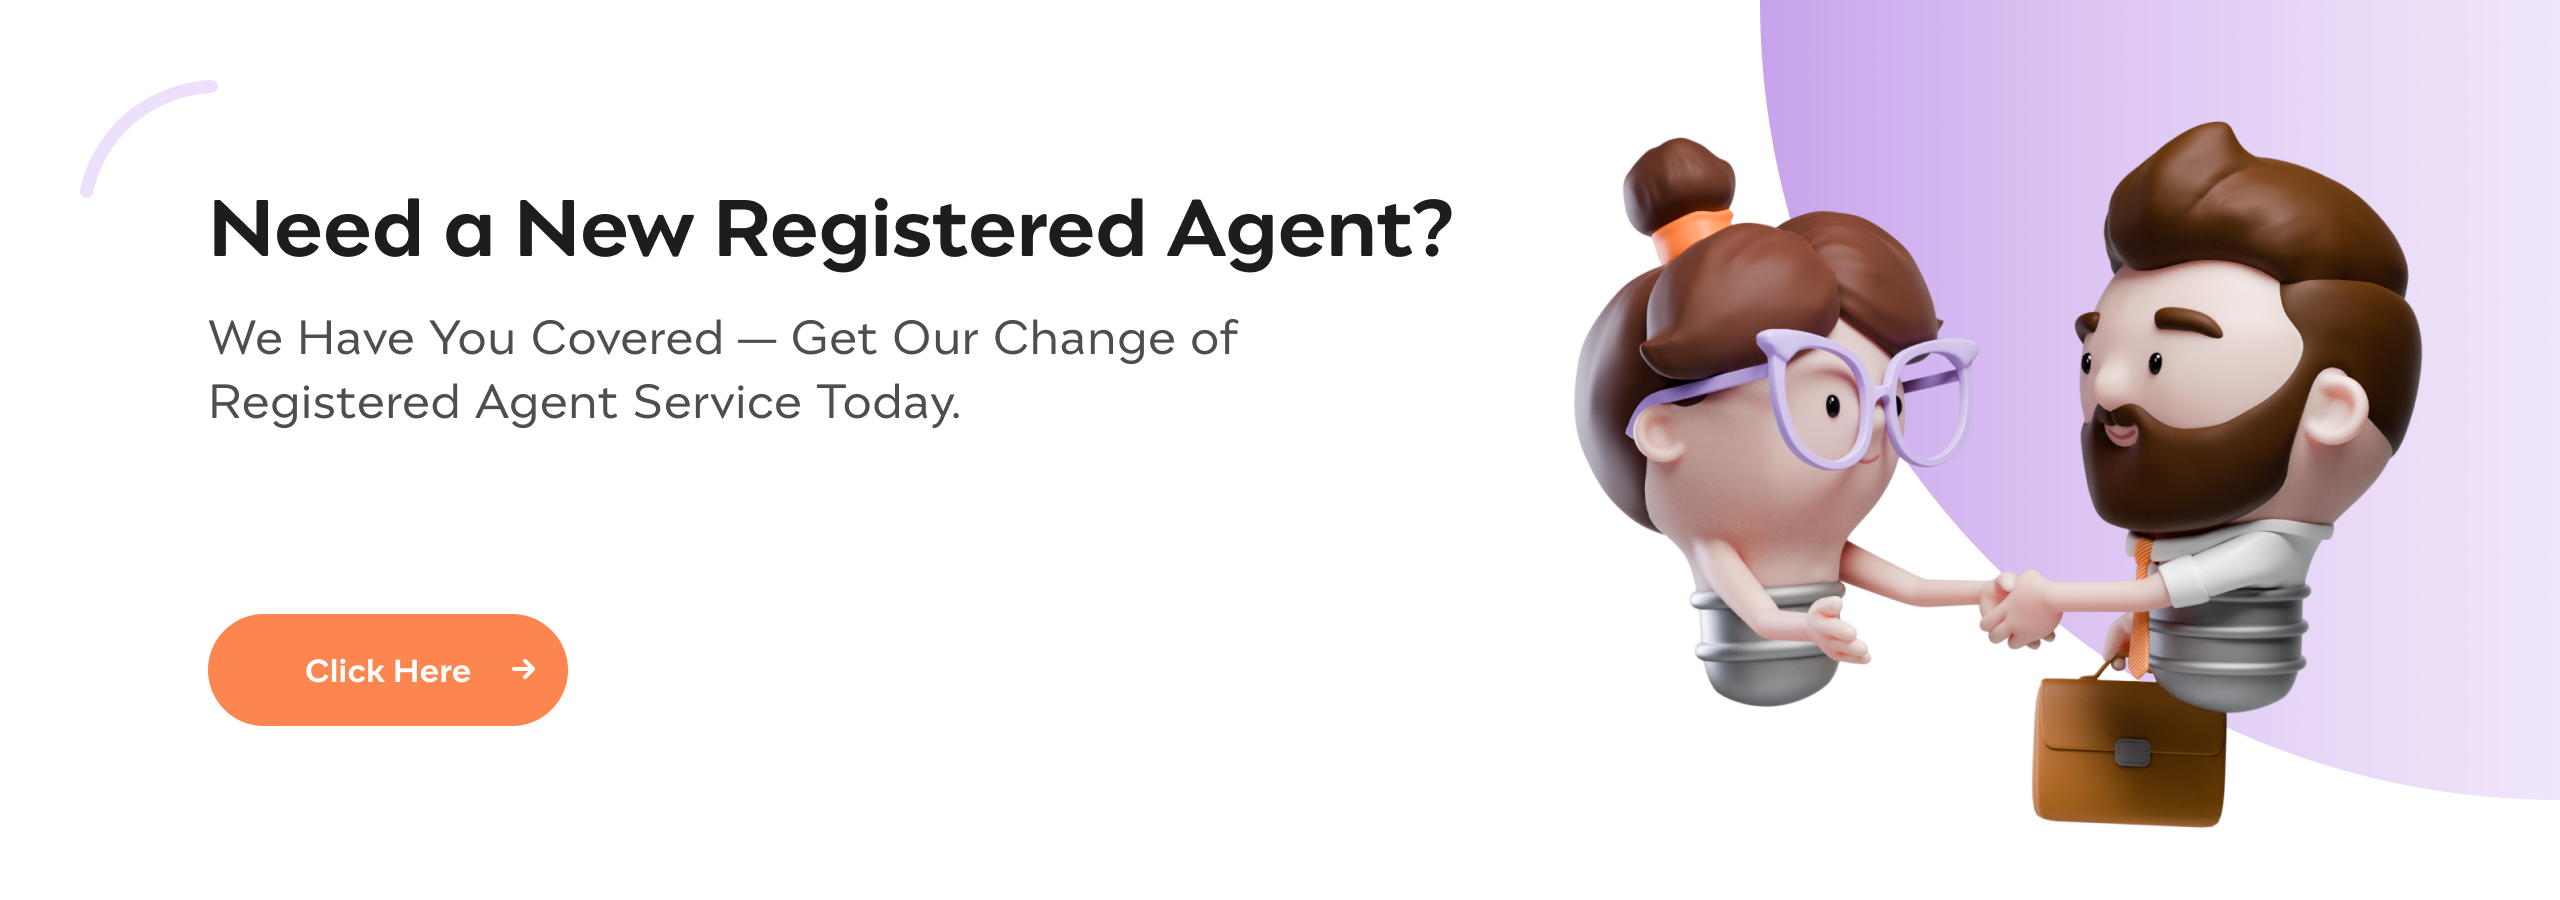 Need a New Registered Agent? We Have You Covered—Get Our Change of Registered Agent Service Today.